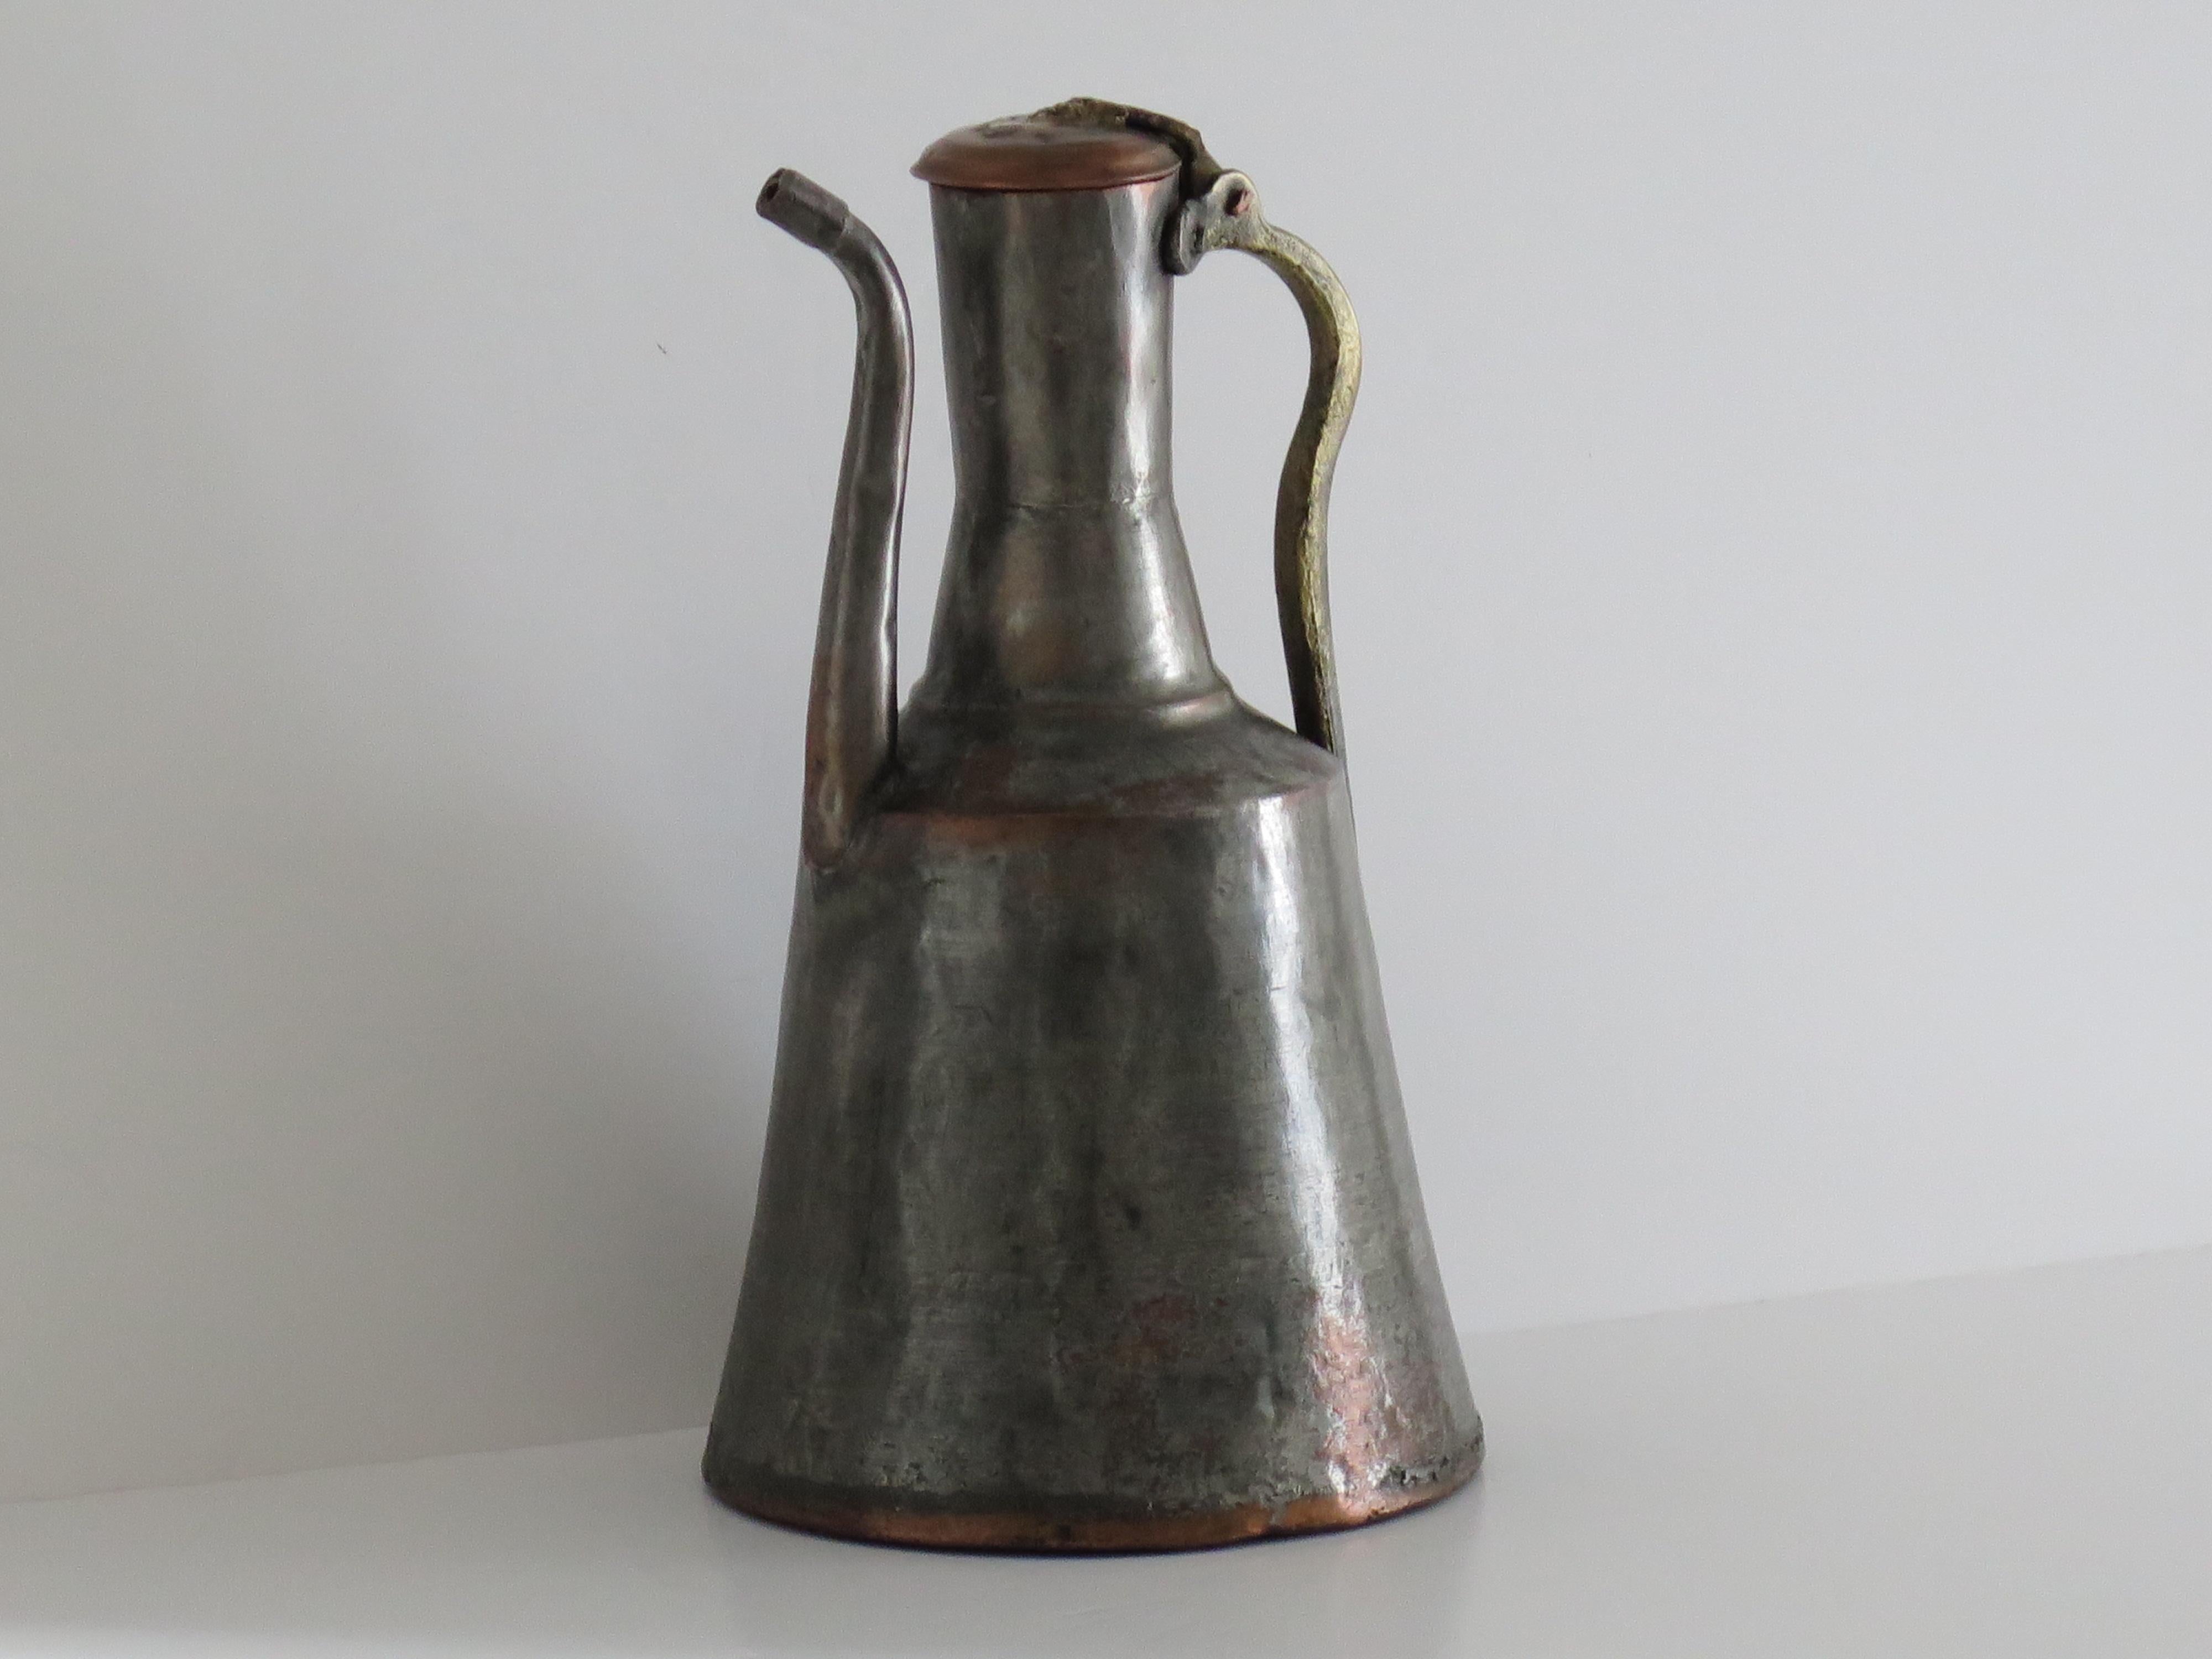 Ewer or Pitcher tinned Copper Turkish / Middle Eastern, Early 19th Century For Sale 1